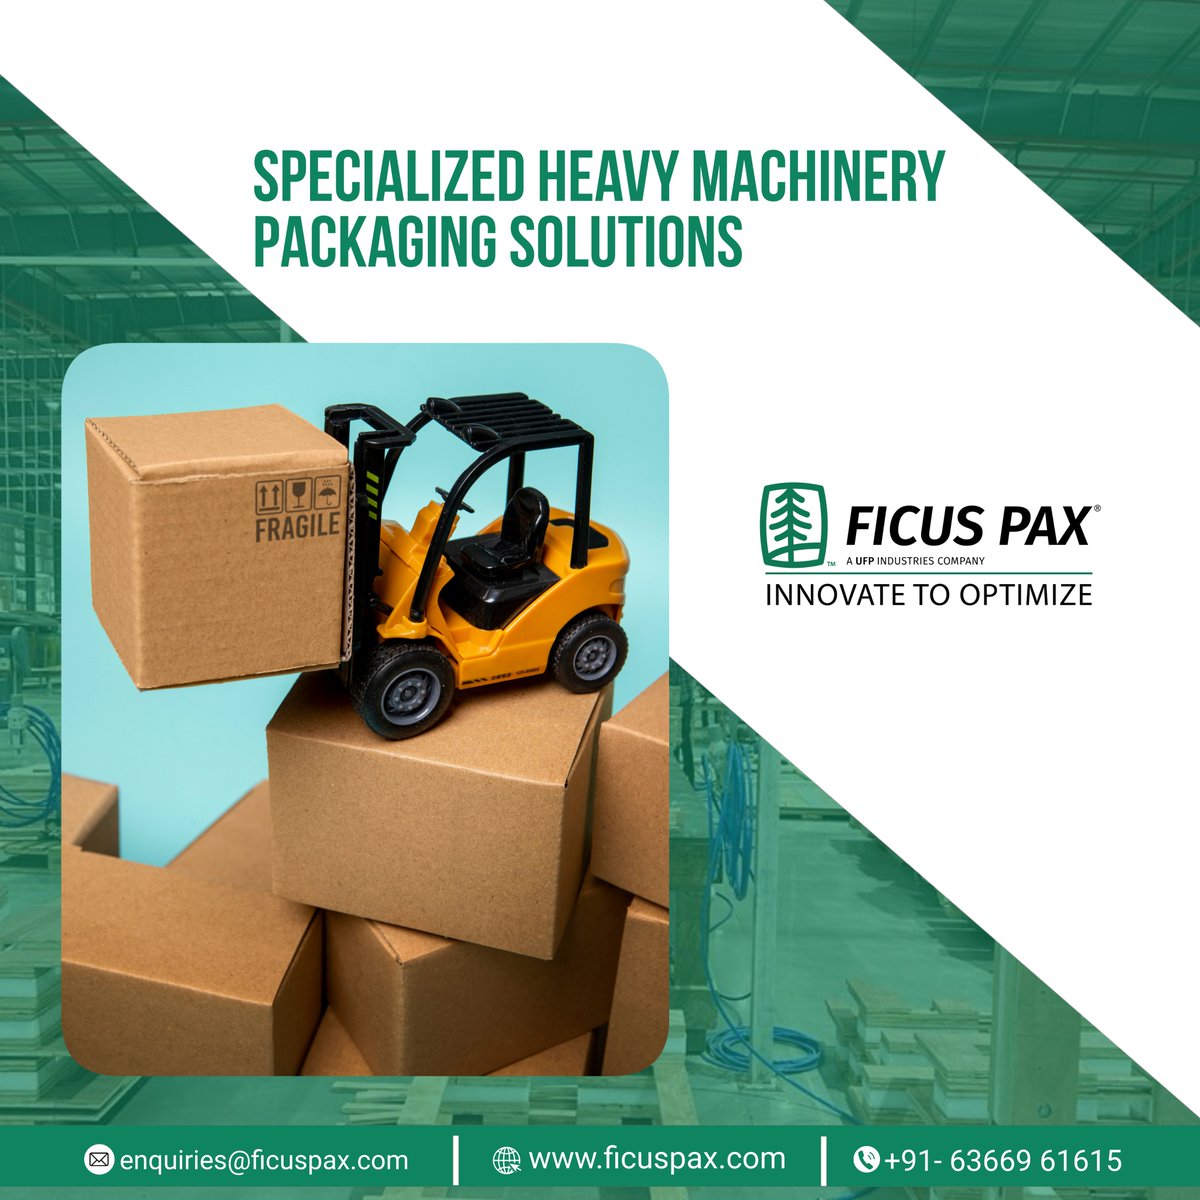 'Introducing Ficus Pax: Your Trusted Source for Heavy Machinery Packaging Solutions. Innovate to optimize with us.'

#FicusPax #HeavyMachinery #PackagingSolutions #IndustrialPackaging #InnovativeSolutions #MachineryTransport #EquipmentProtection #Logistics #SafetyFirst #Optimi